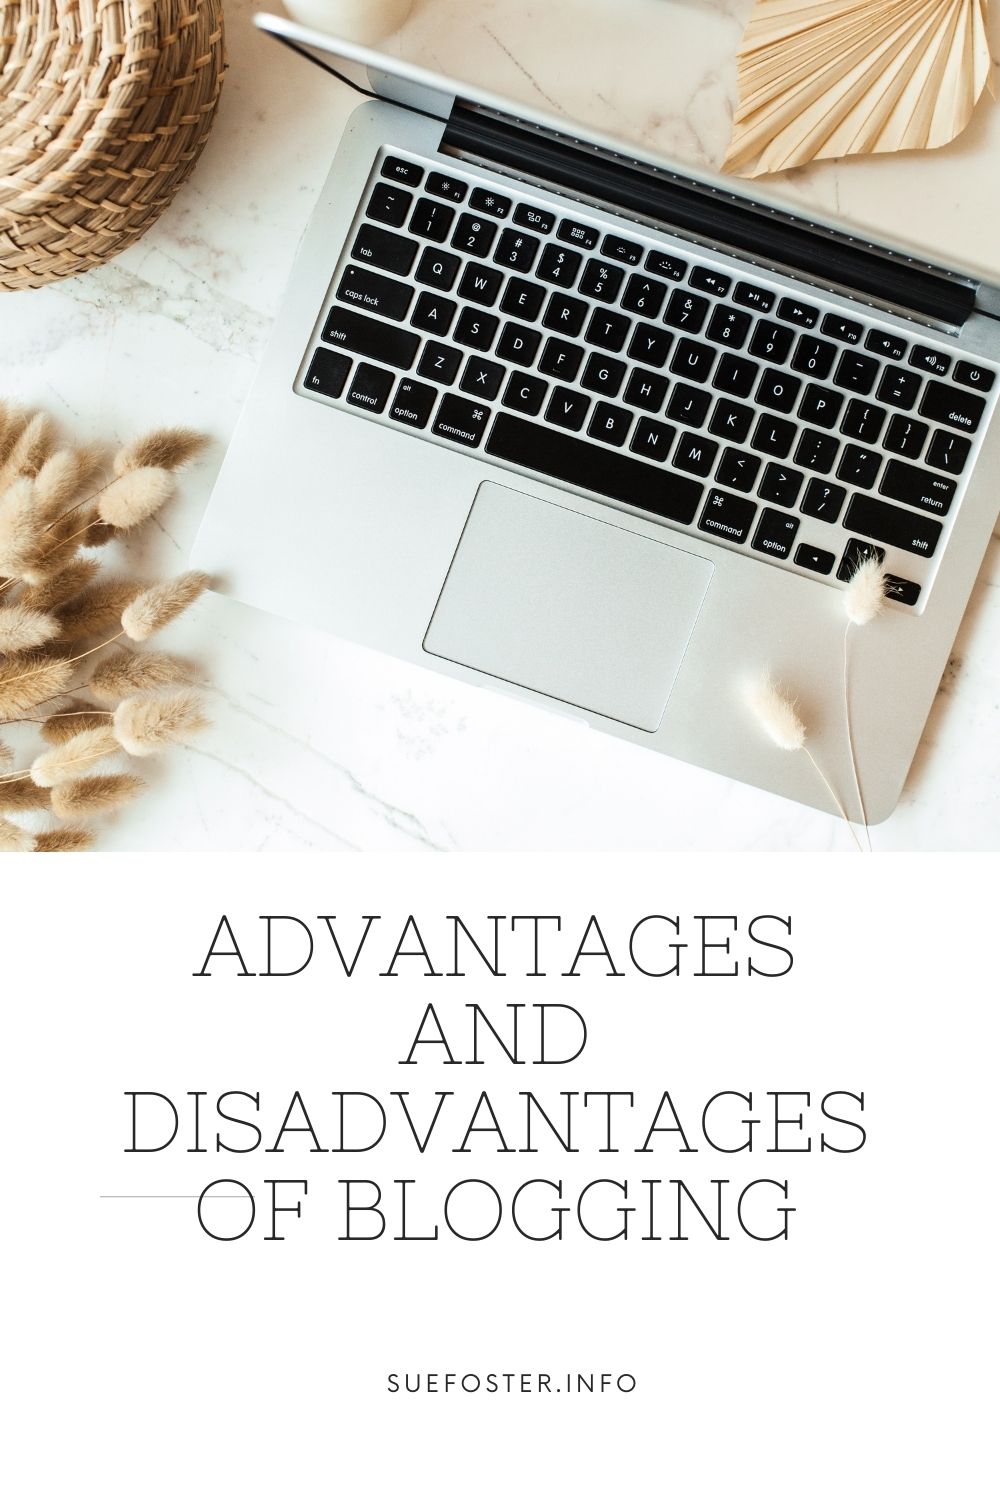 Blogging is a popular medium for sharing ideas and knowledge with others, but it has its pros and cons. In this article, we'll examine both the advantages and disadvantages of starting a blog.